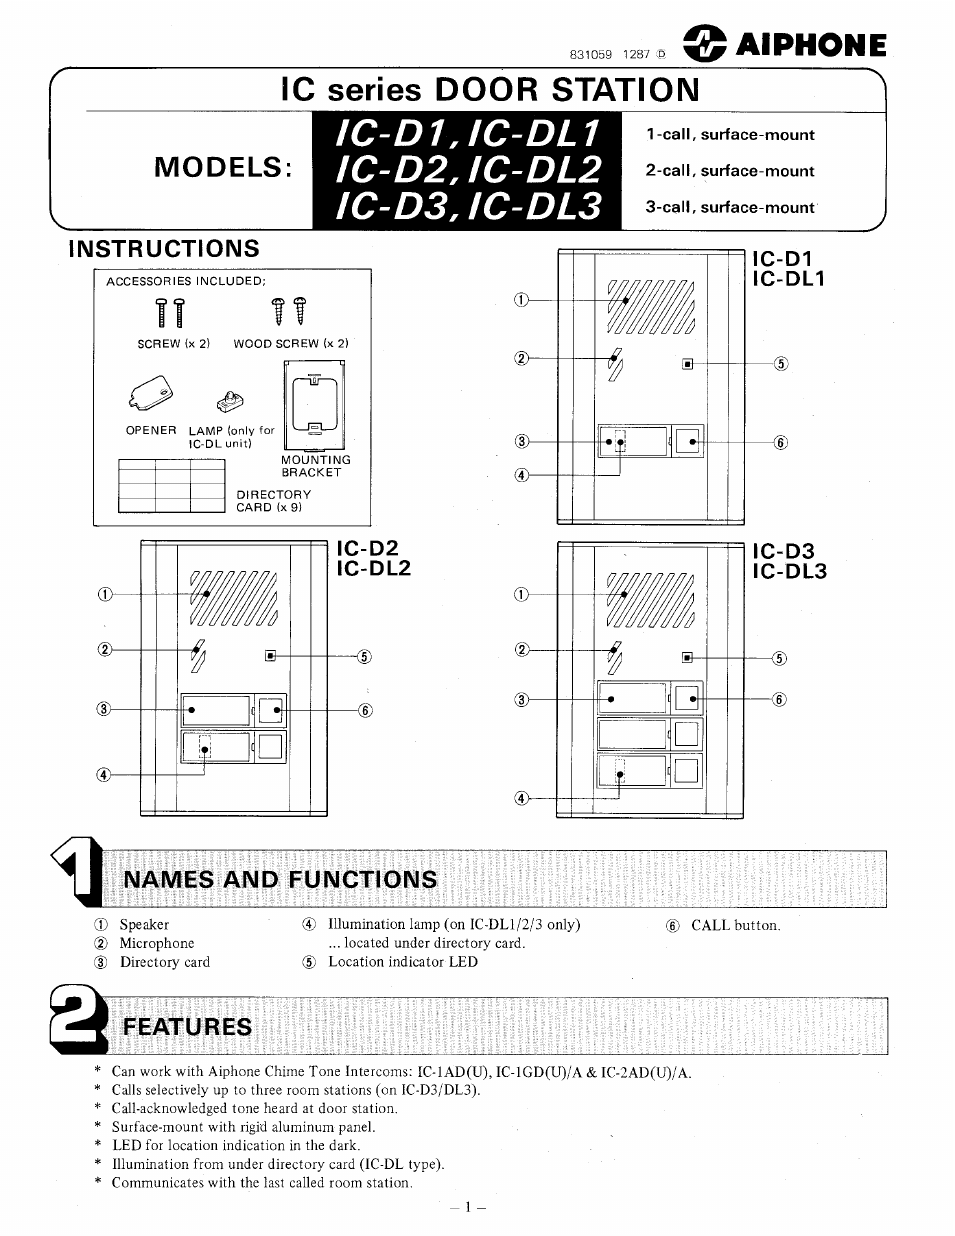 DOOR STATION IC-D3 (Page 1)